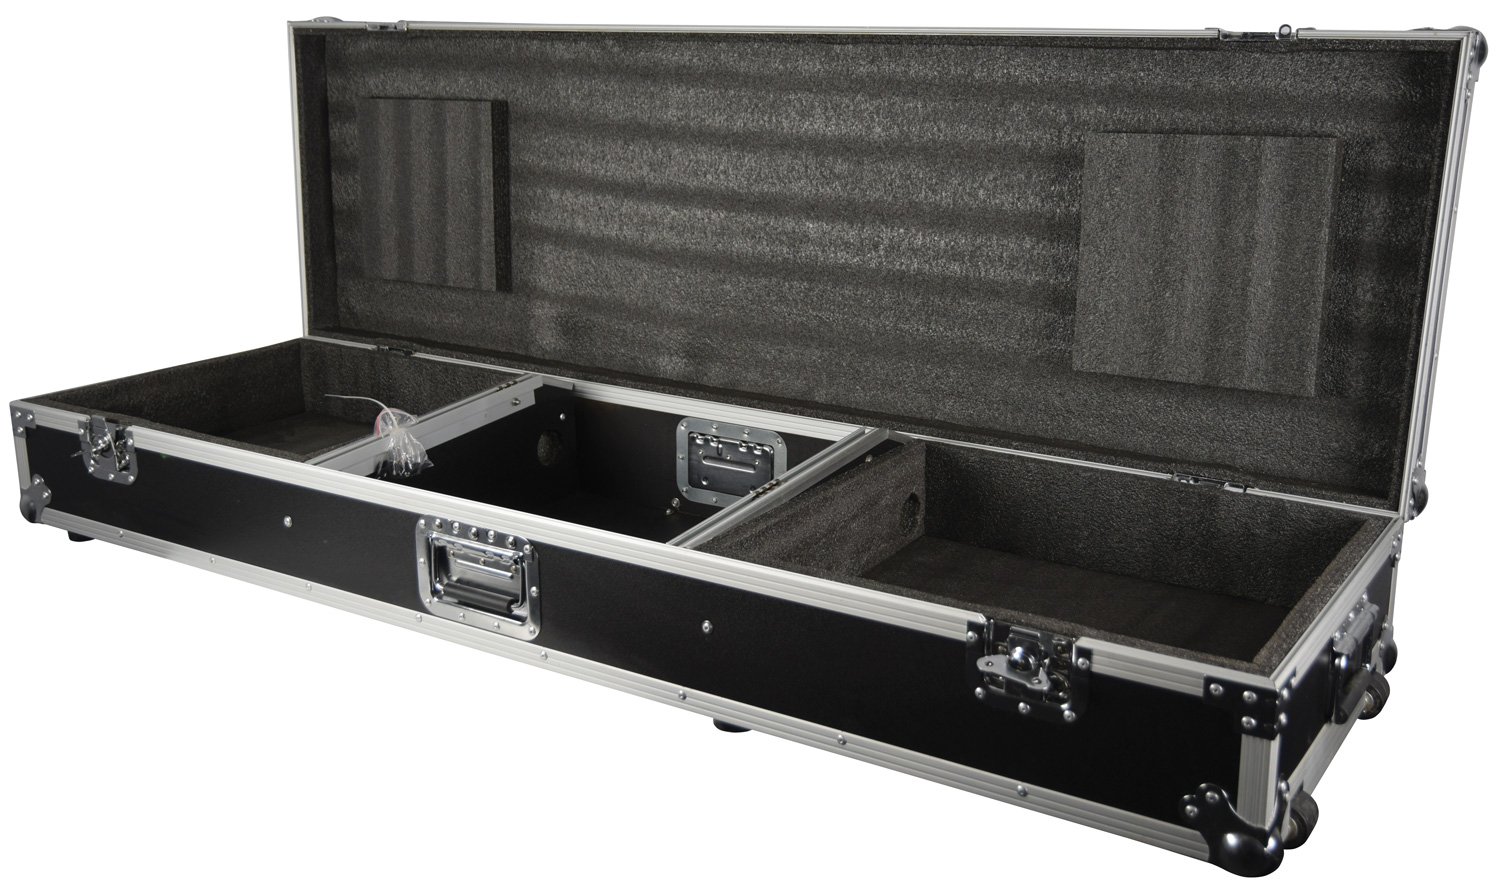 Flightcase for A Mixer and 2 x Turntables Flightcase for 8U 19" mixer and 2 x CD players/turntable